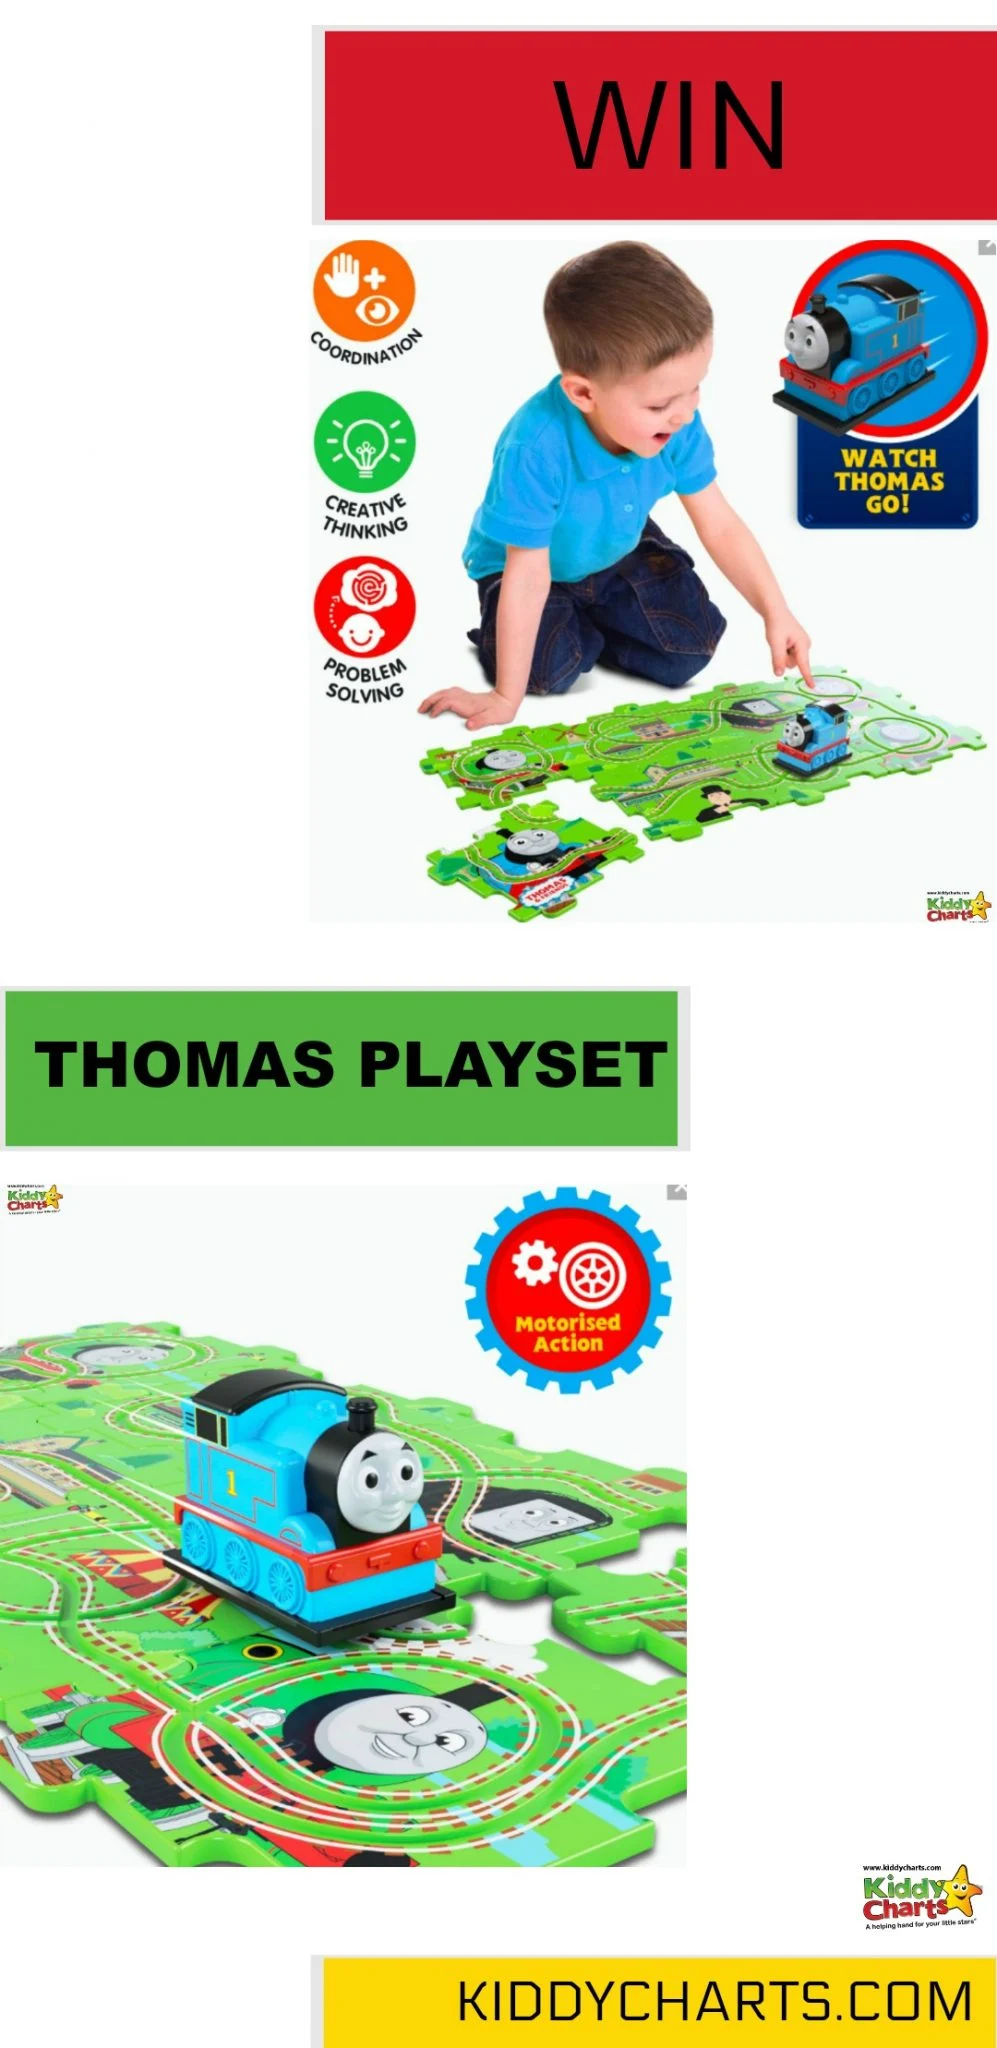 Win a gorgeous Thomas playset for your kids (Closes 24th May) #kids #giveaways #toys